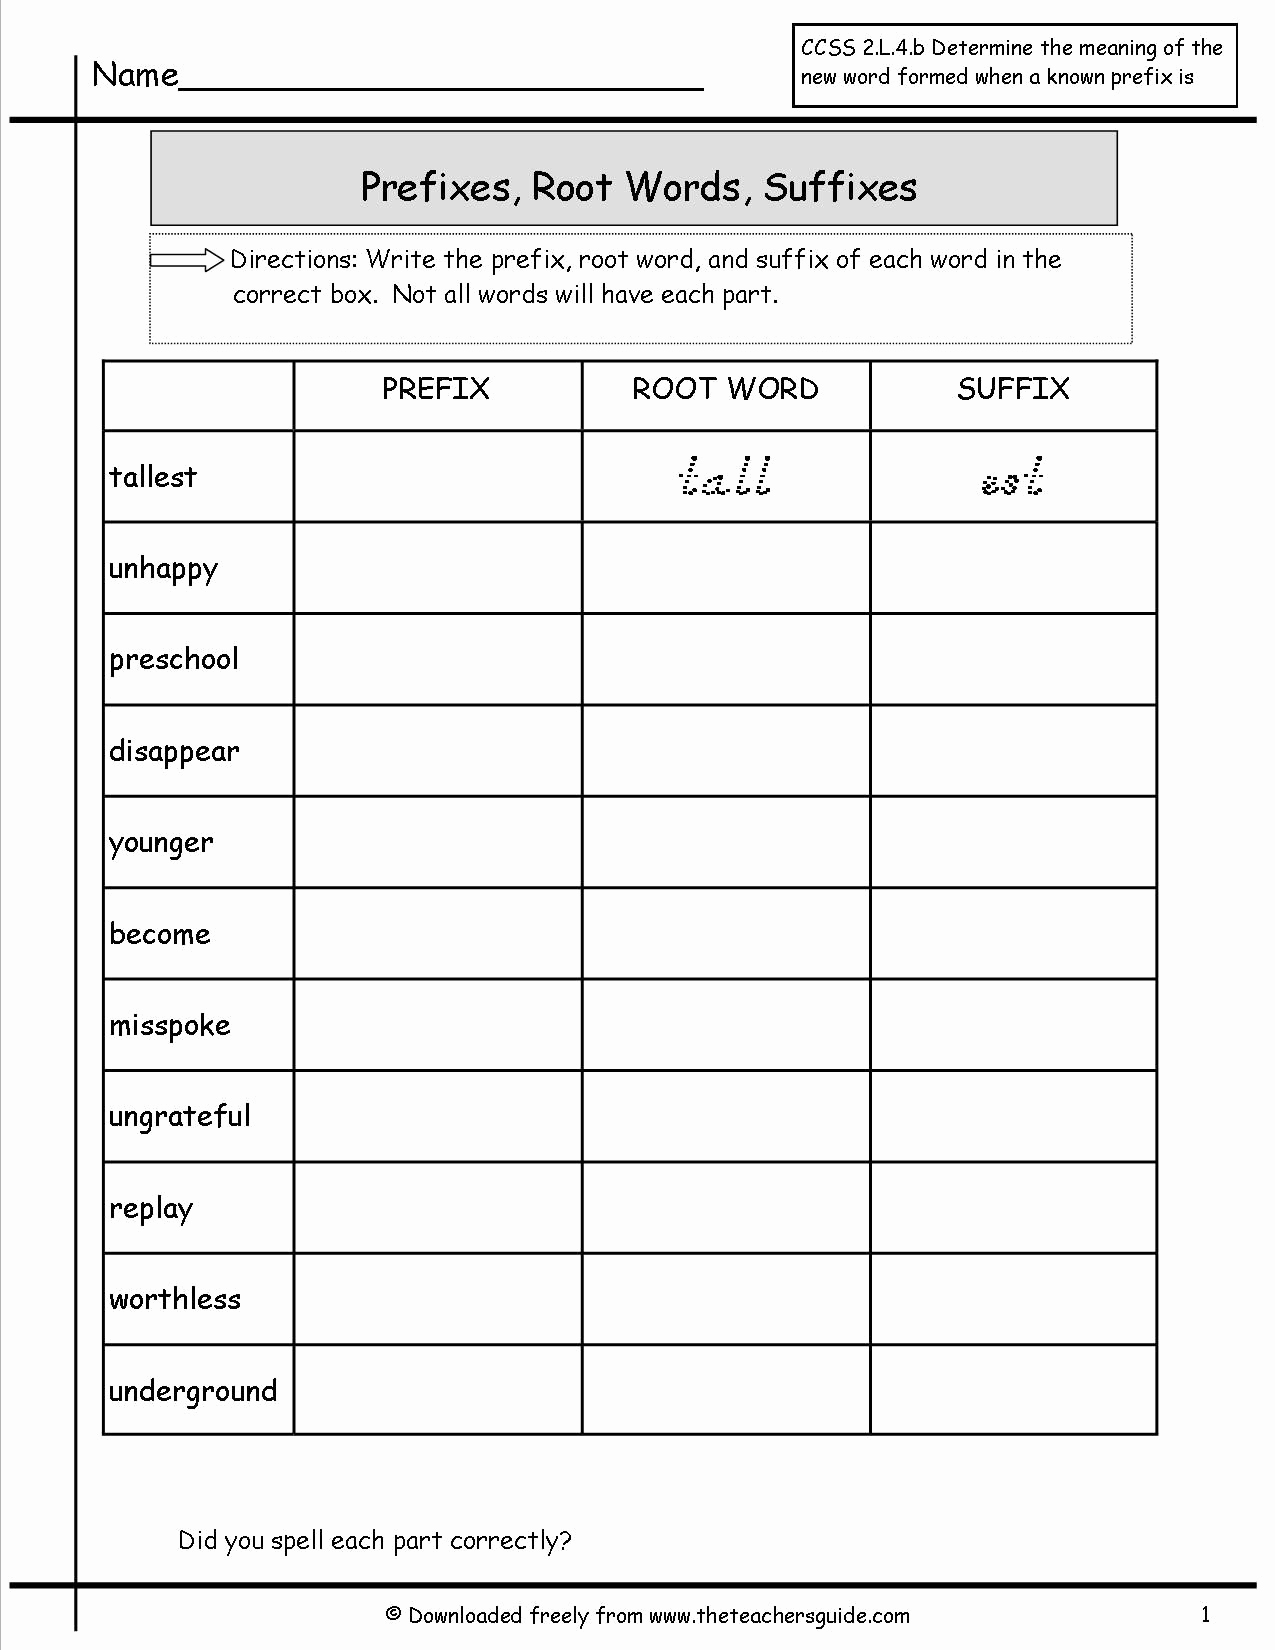 Free Suffix Worksheet Beautiful Teach Child How to Read Printable Prefix and Suffix